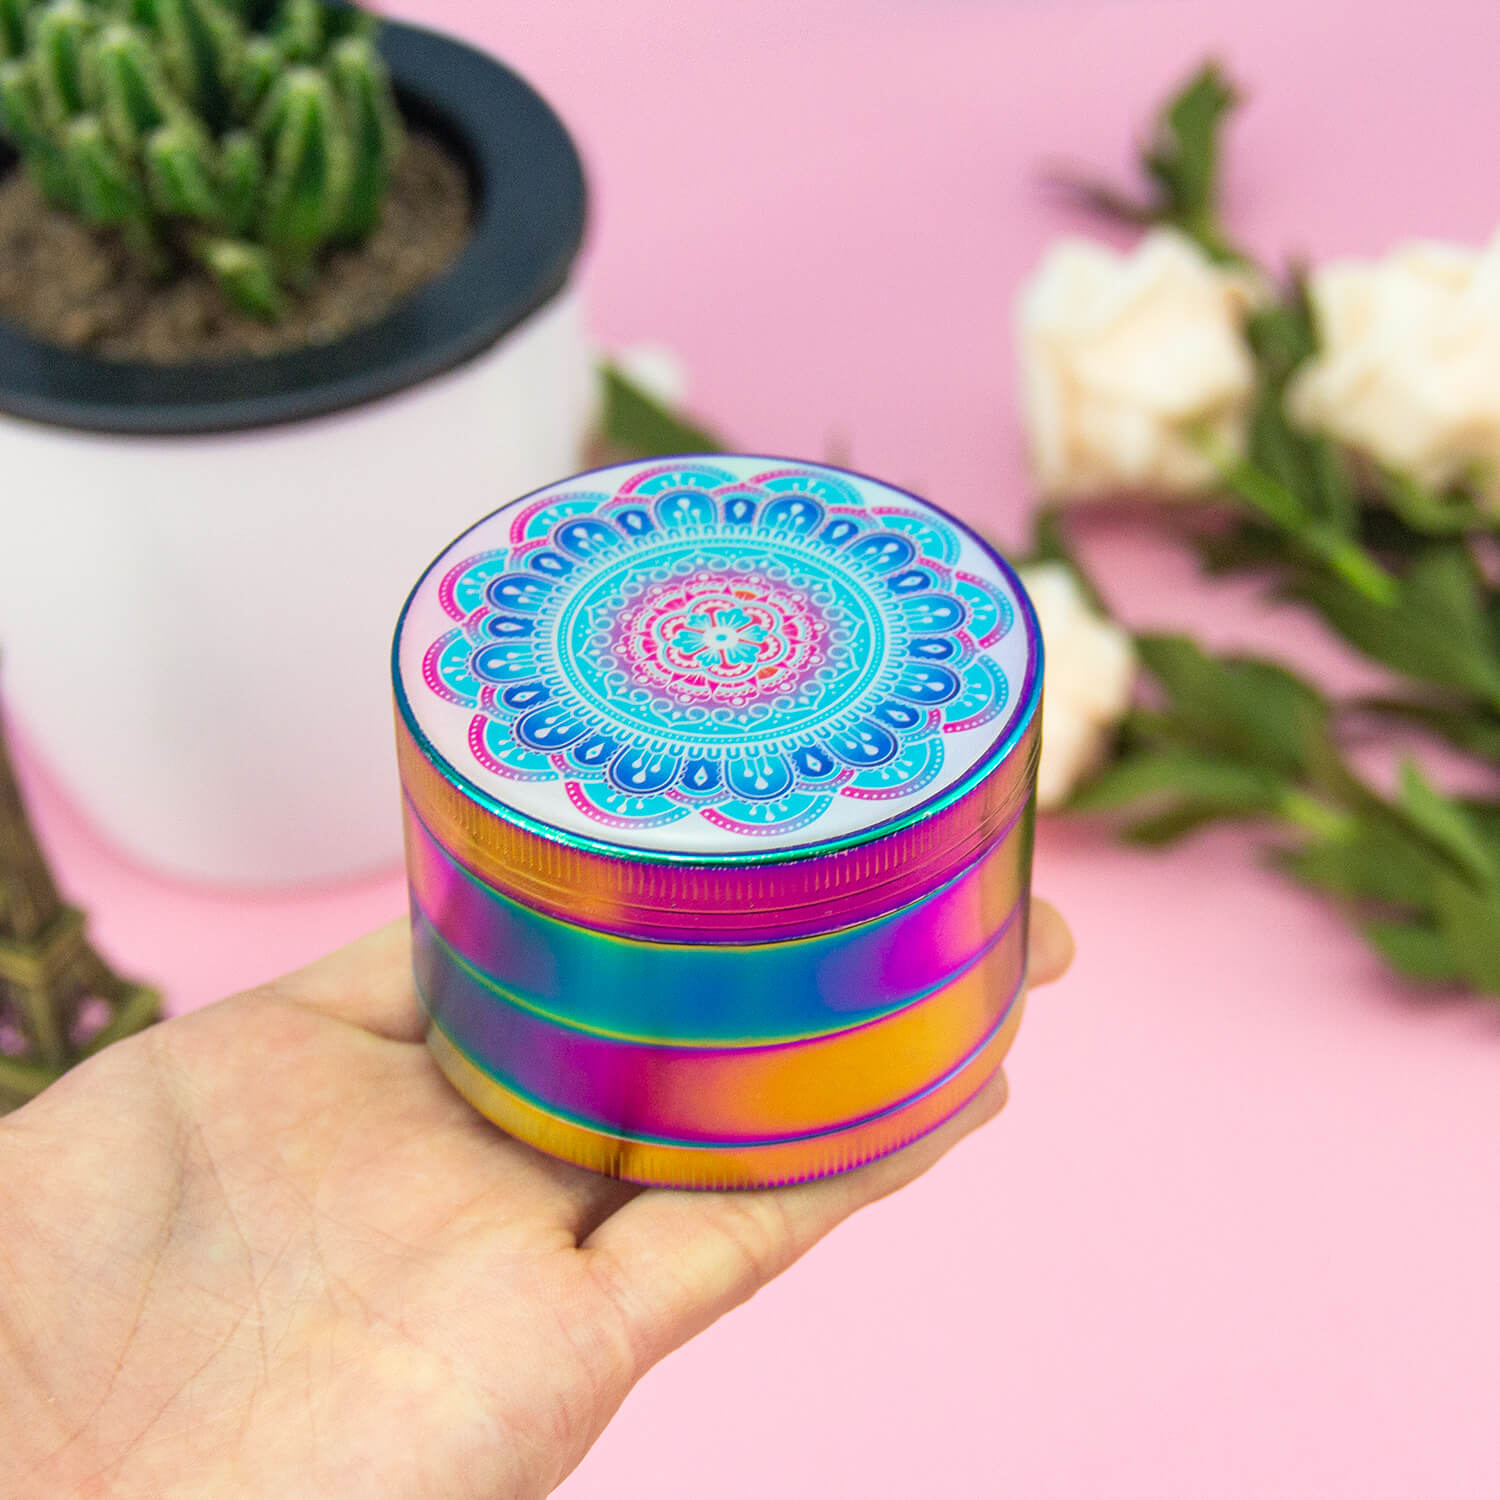 Weed Grinder 2.5 inches - INHALCO